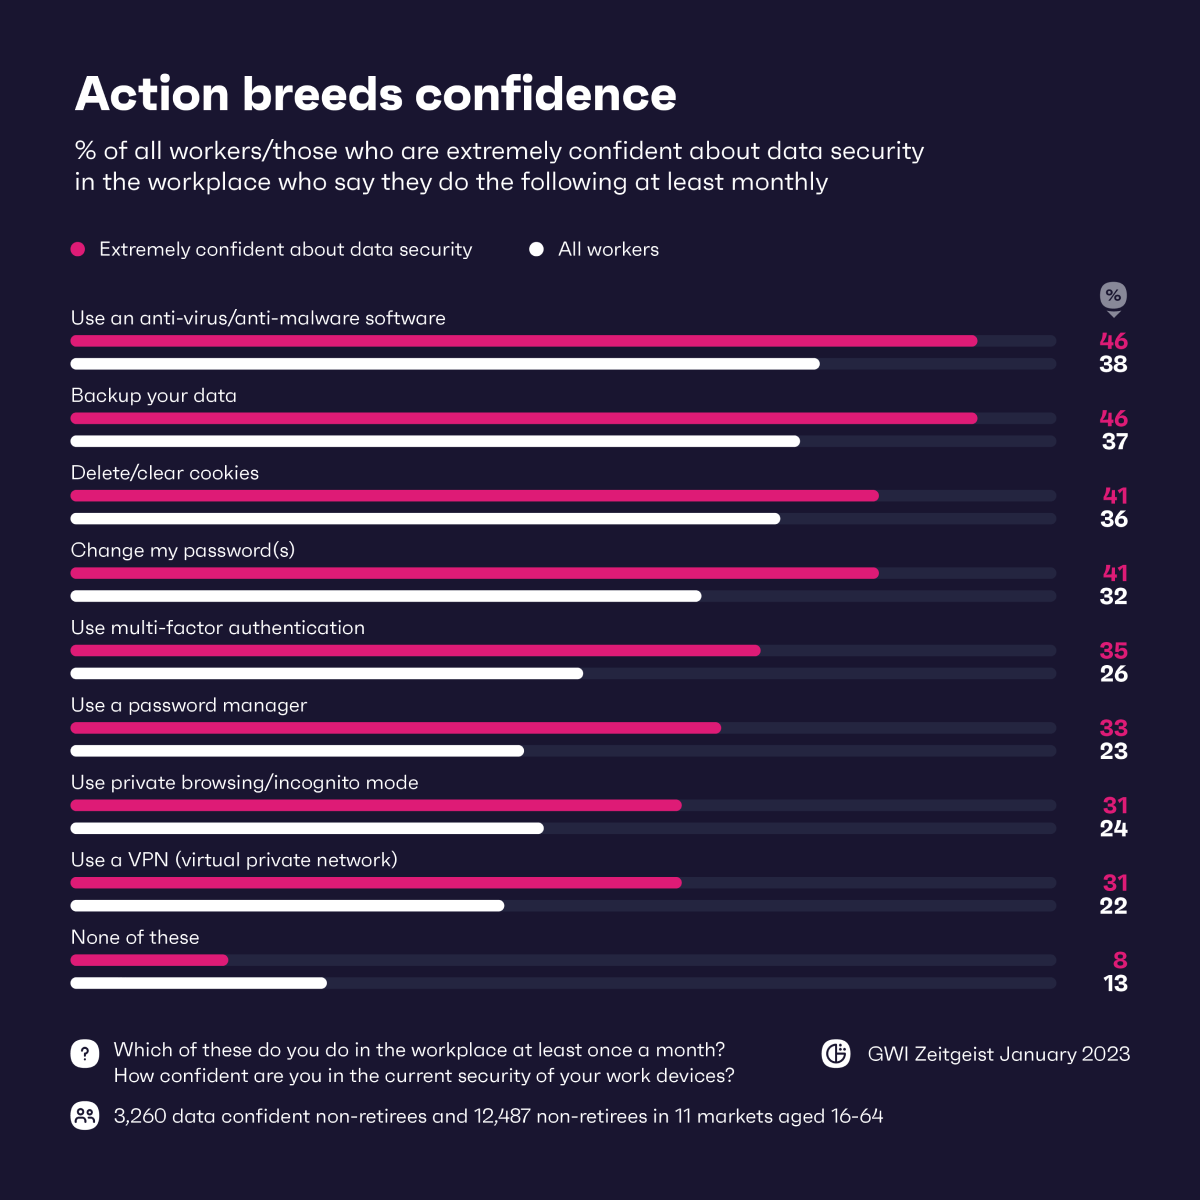 Chart showing actions of workers who are confident in data security in the workplace